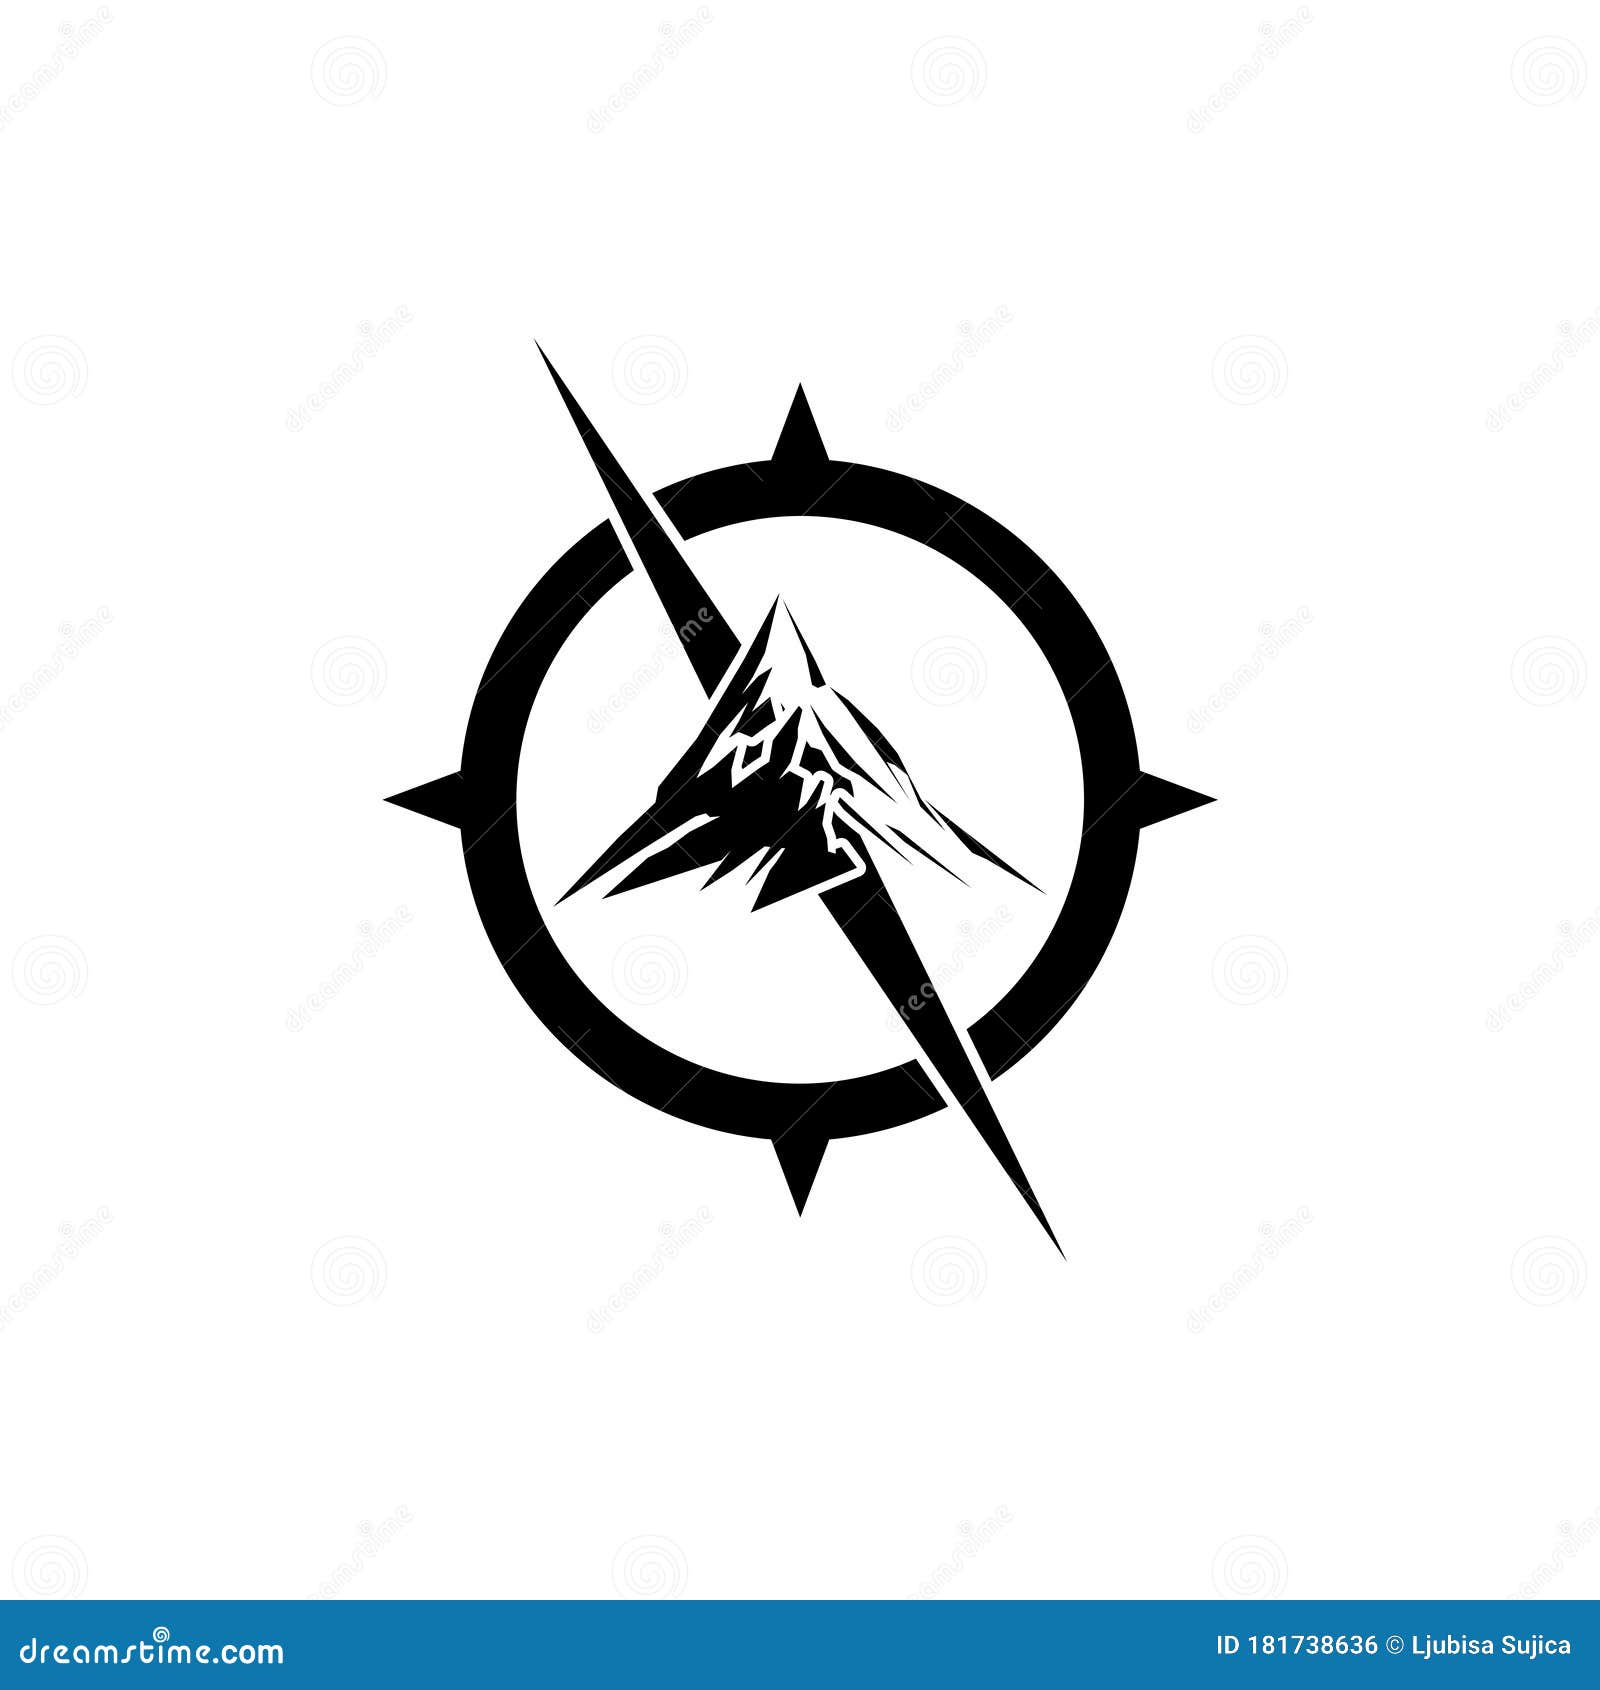 You searched for compass icon symbol logo template. outdoor adventure compass  logo